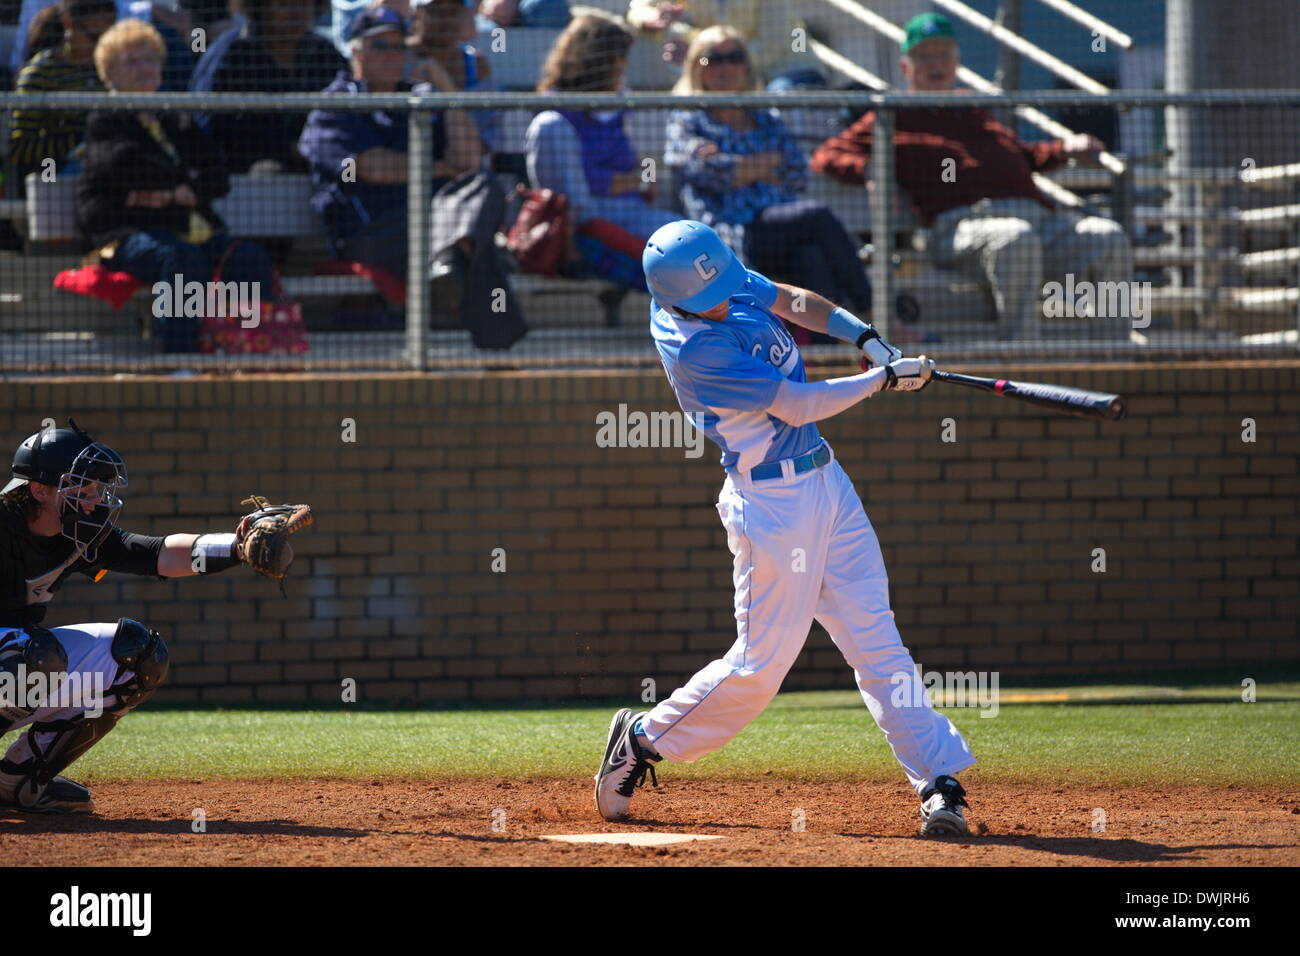 Kennesaw, Georgia, USA.  March 8, 2014 -- Columbia shortstop Aaron Silbar (10) at bat during the first game of Saturday's doubleheader between Columbia University and Kennesaw State University. The teams split the doubleheader. Credit:  Wayne Hughes | Alamy Live News Stock Photo